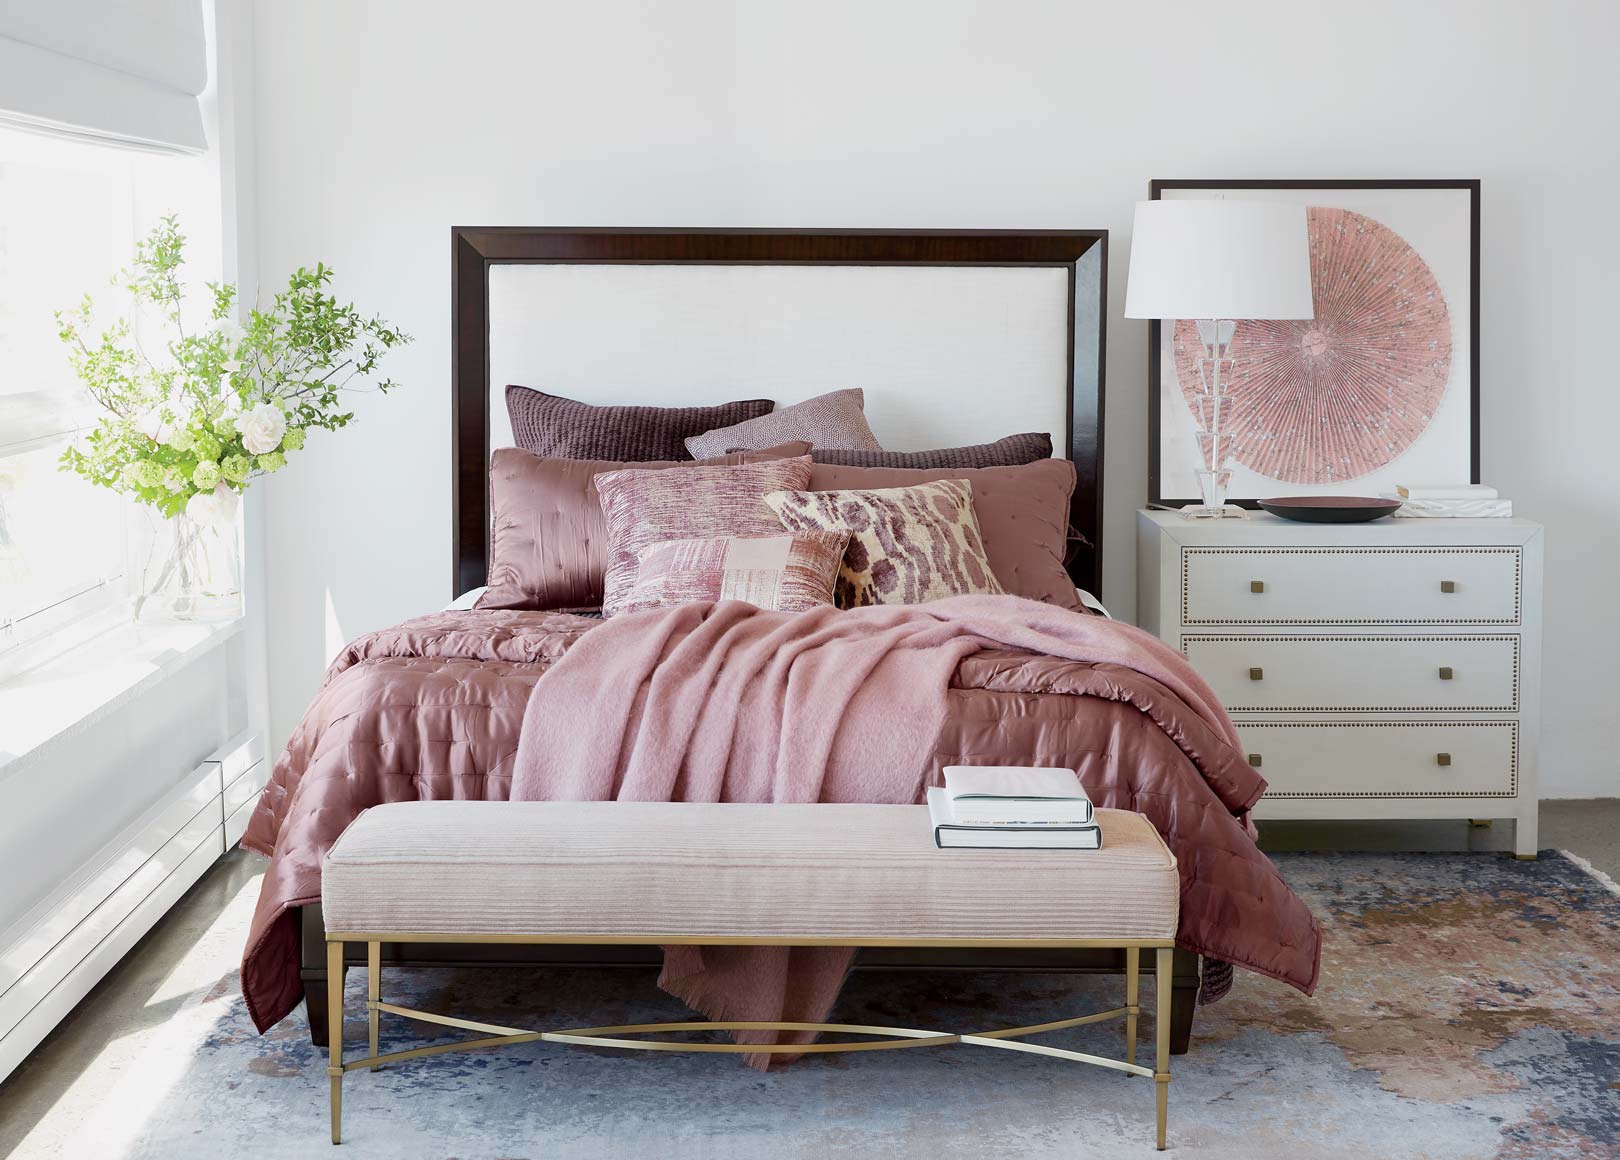 Dusty Pink - Check How to Use It in Interior Design